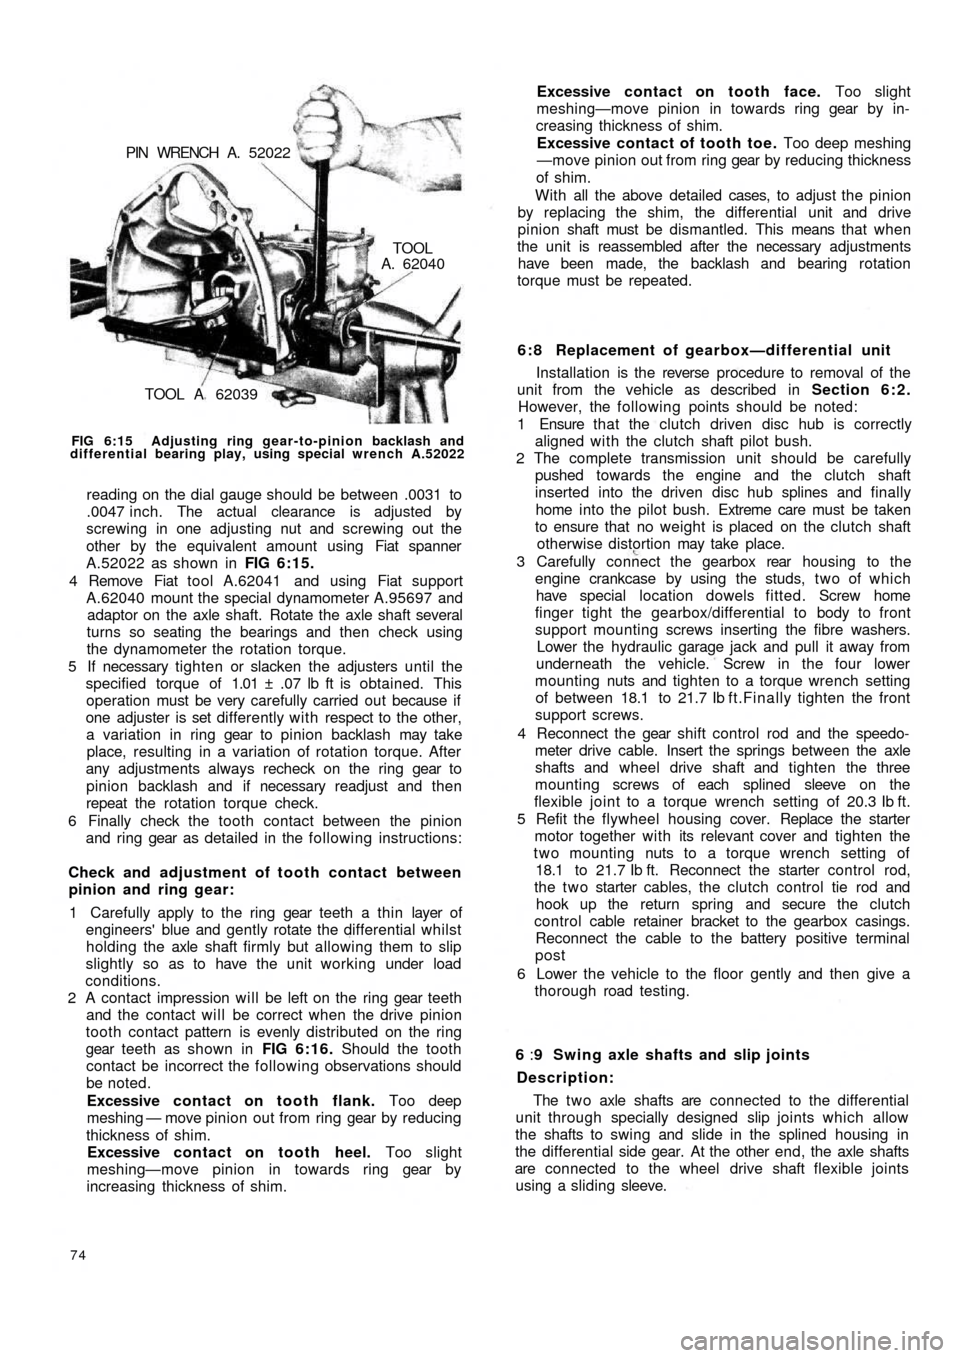 FIAT 500 1964 1.G Workshop Manual TOOL A  62039
TOOLA. 62040 PIN  WRENCH  A.  52022
FIG 6:15  Adjusting ring gear-to-pinion backlash and
differential bearing play, using special wrench A.52022
reading on the dial gauge should be betwe